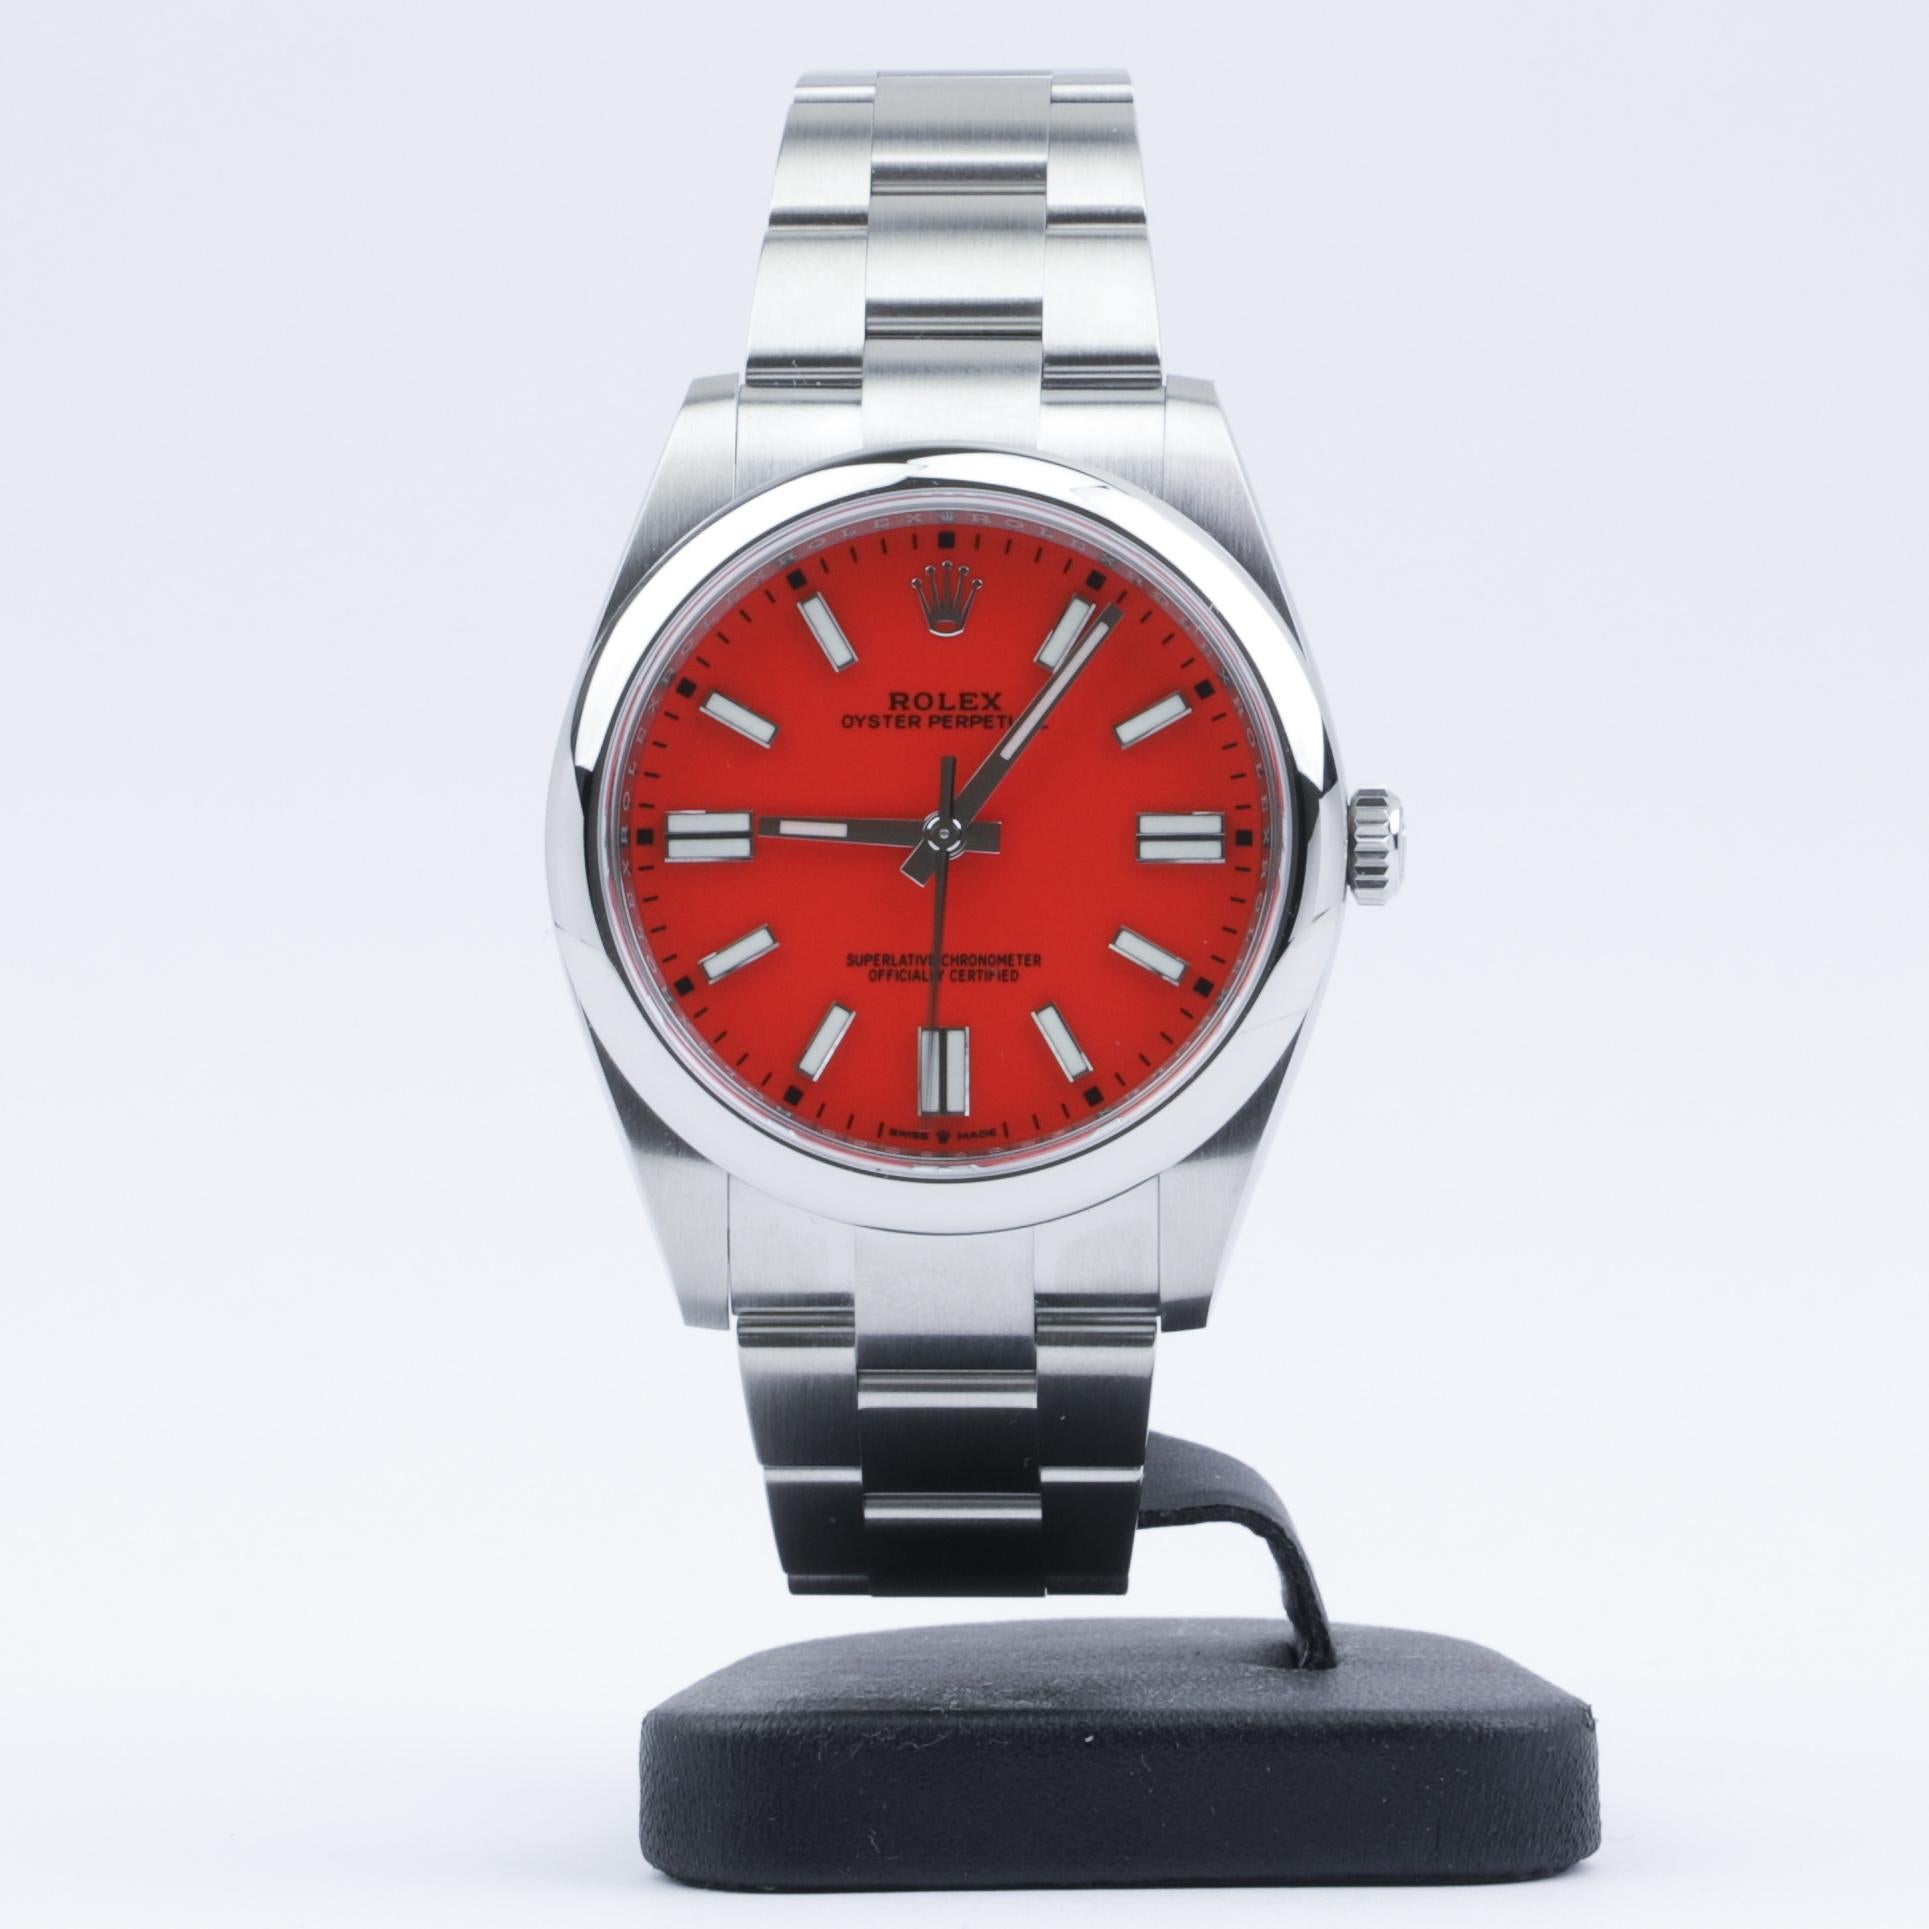 This Rolex Oyster Perpetual 41mm Coral Red Dial 124300 2021 is in overall excellent pre-owned condition. 

Comes with new card.

Rolex Oyster Perpetual 41 reference 124300 with “Coral Red” dial. This watch is 2021 model which features the new